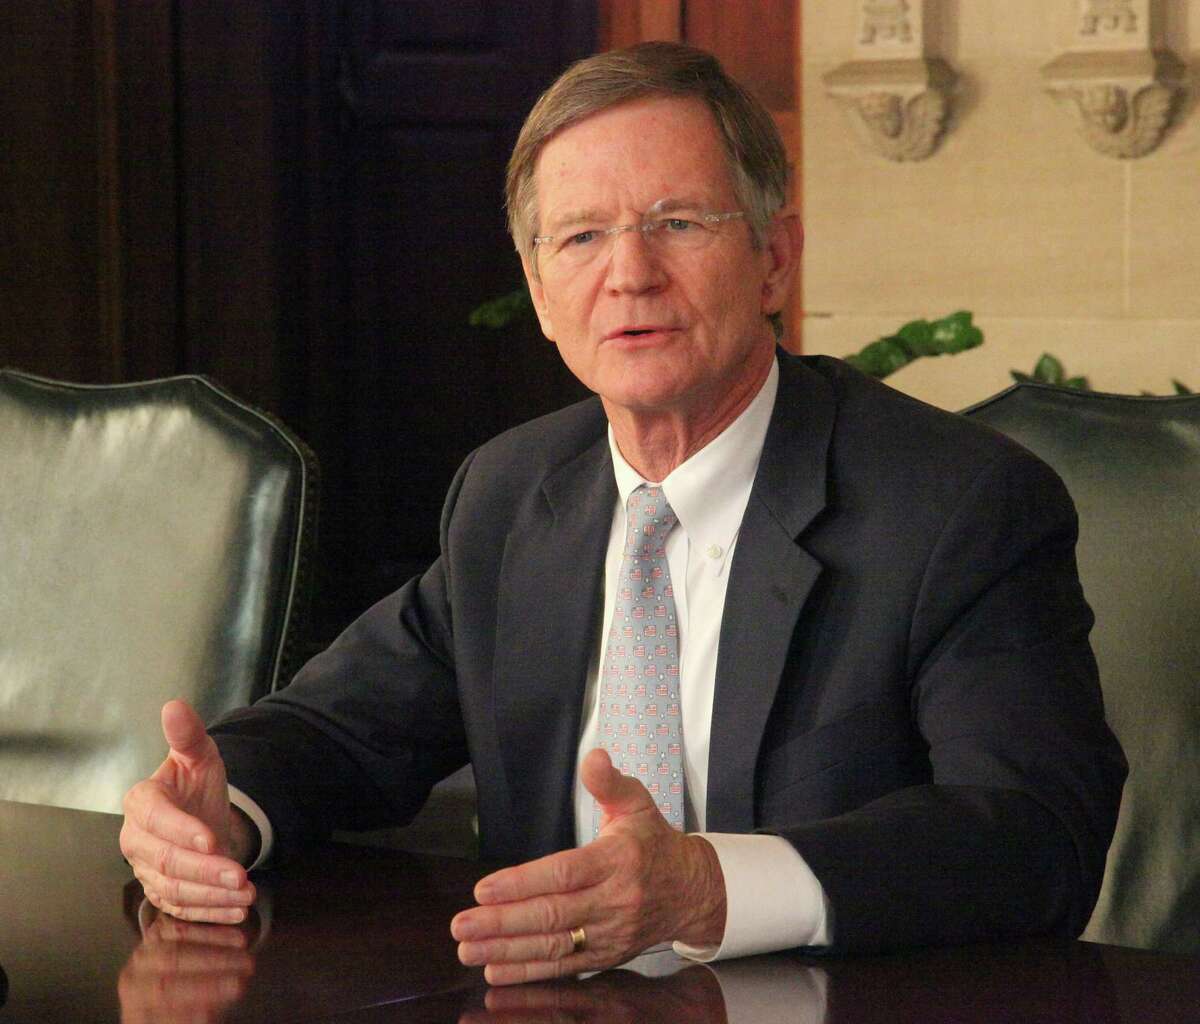 U.S. Rep. Lamar Smith meeting with SAEN Editorial Board for a wide ranging discussion on November 6, 2013.